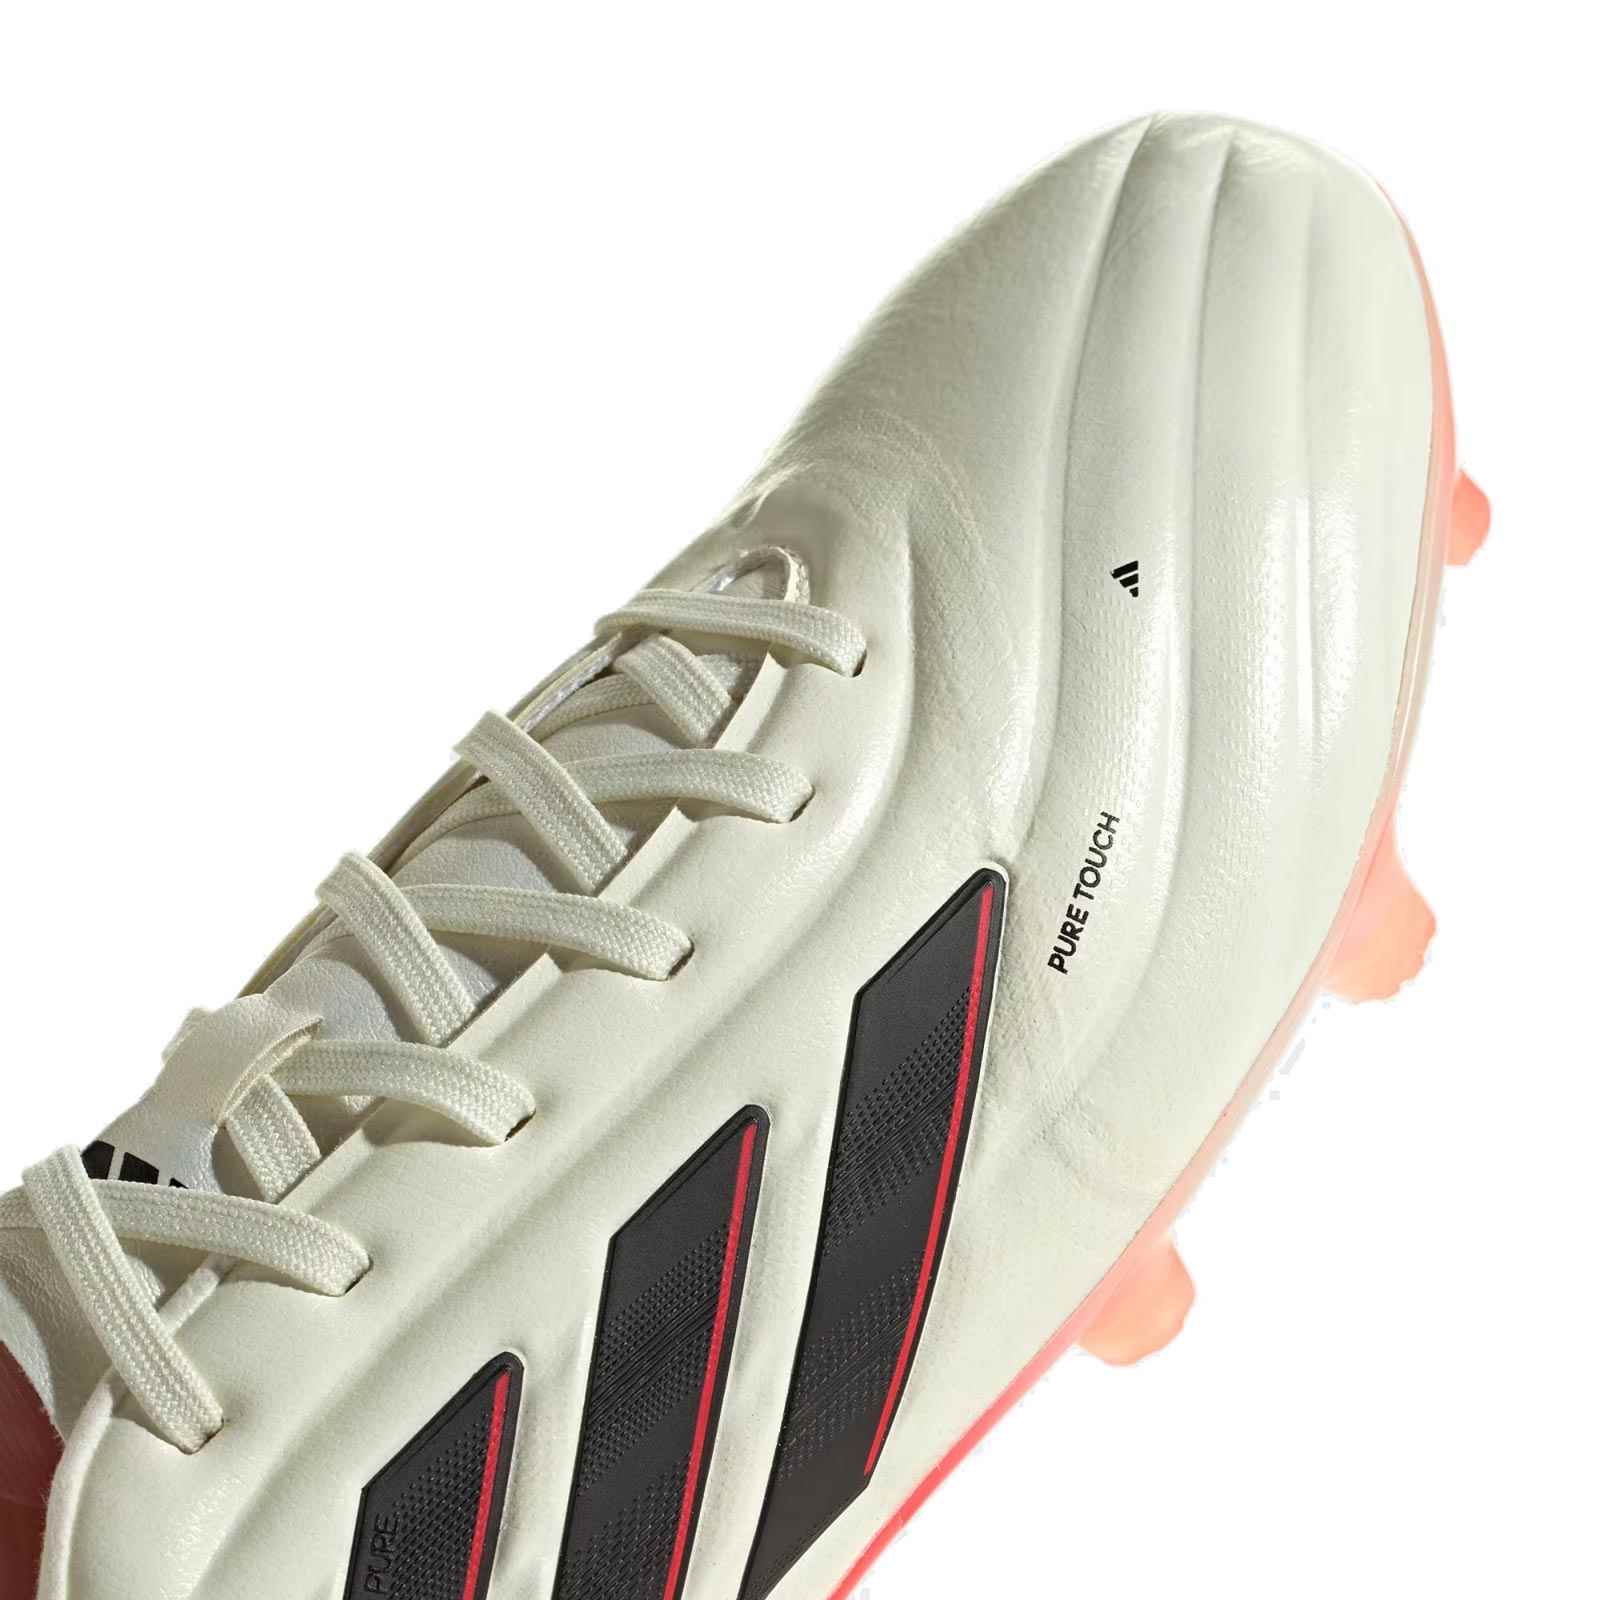 adidas Copa Pure II Pro Firm-Ground Football Boots